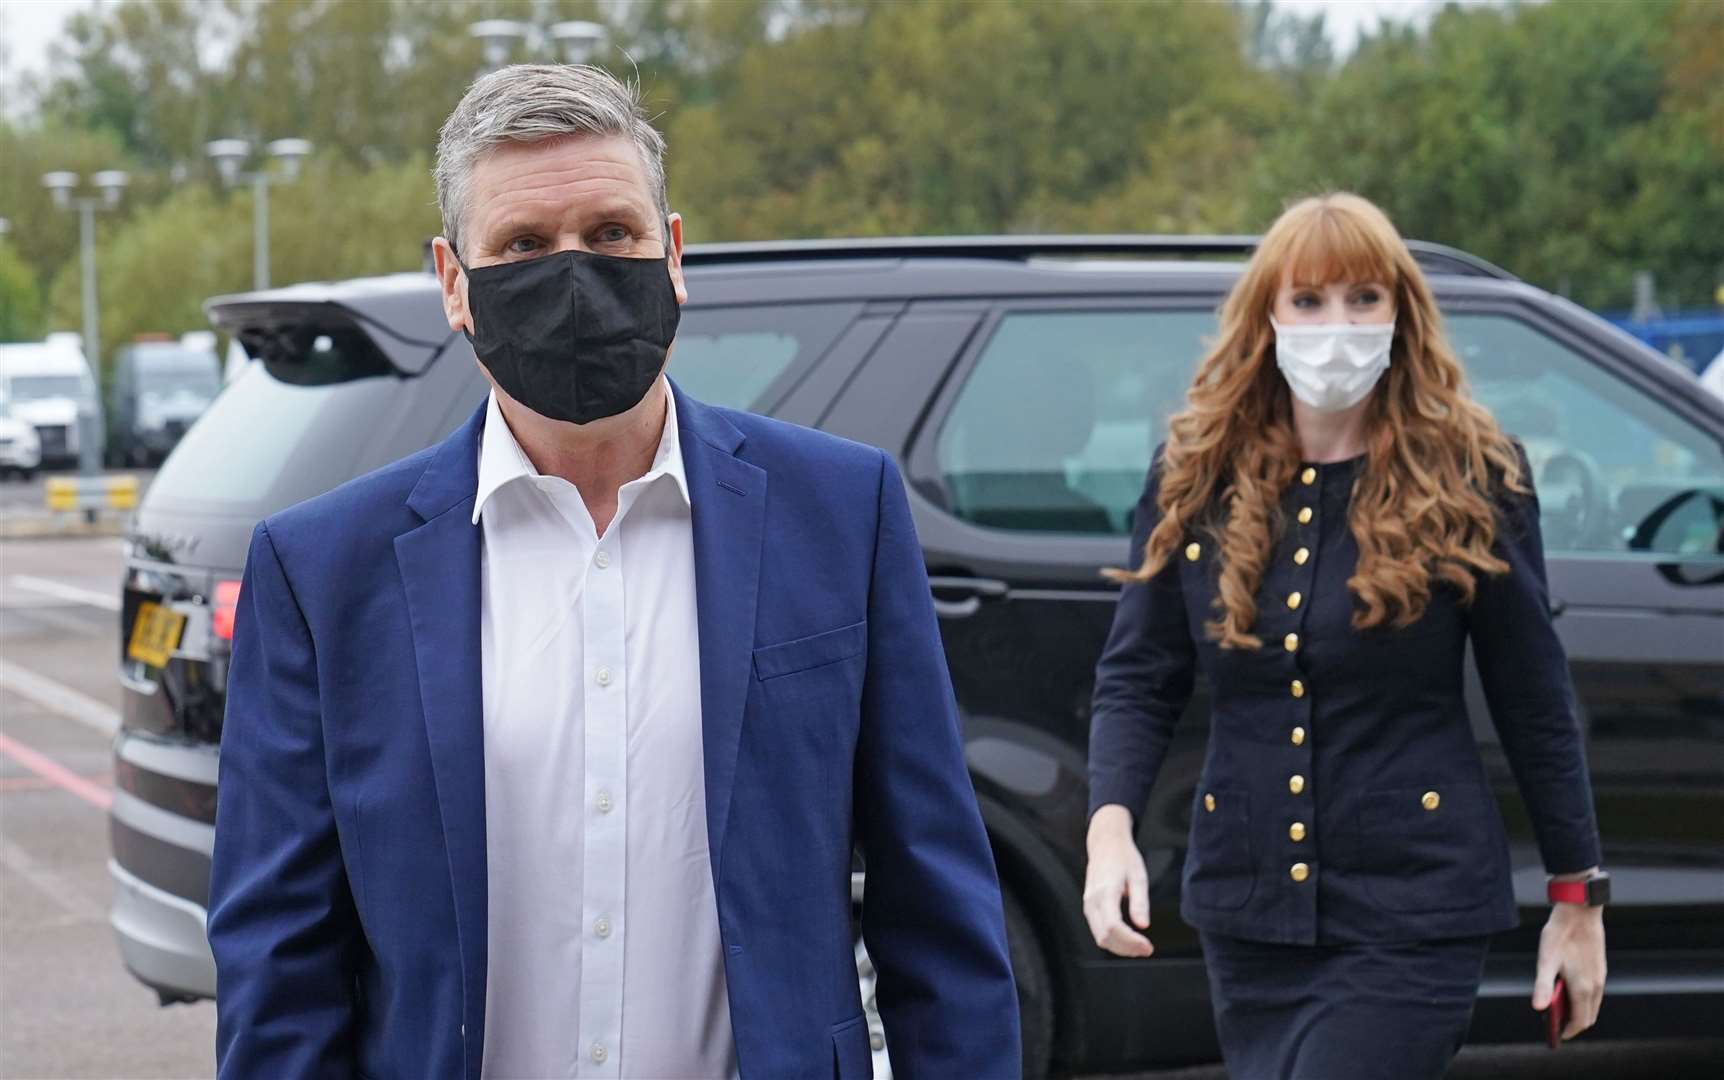 Labour Party leader Keir Starmer and deputy leader Angela Rayner arrive at engineering firm Ricardo in Shoreham-by-Sea, West Sussex, ahead of the Labour Party conference (Stefan Rousseau/PA)